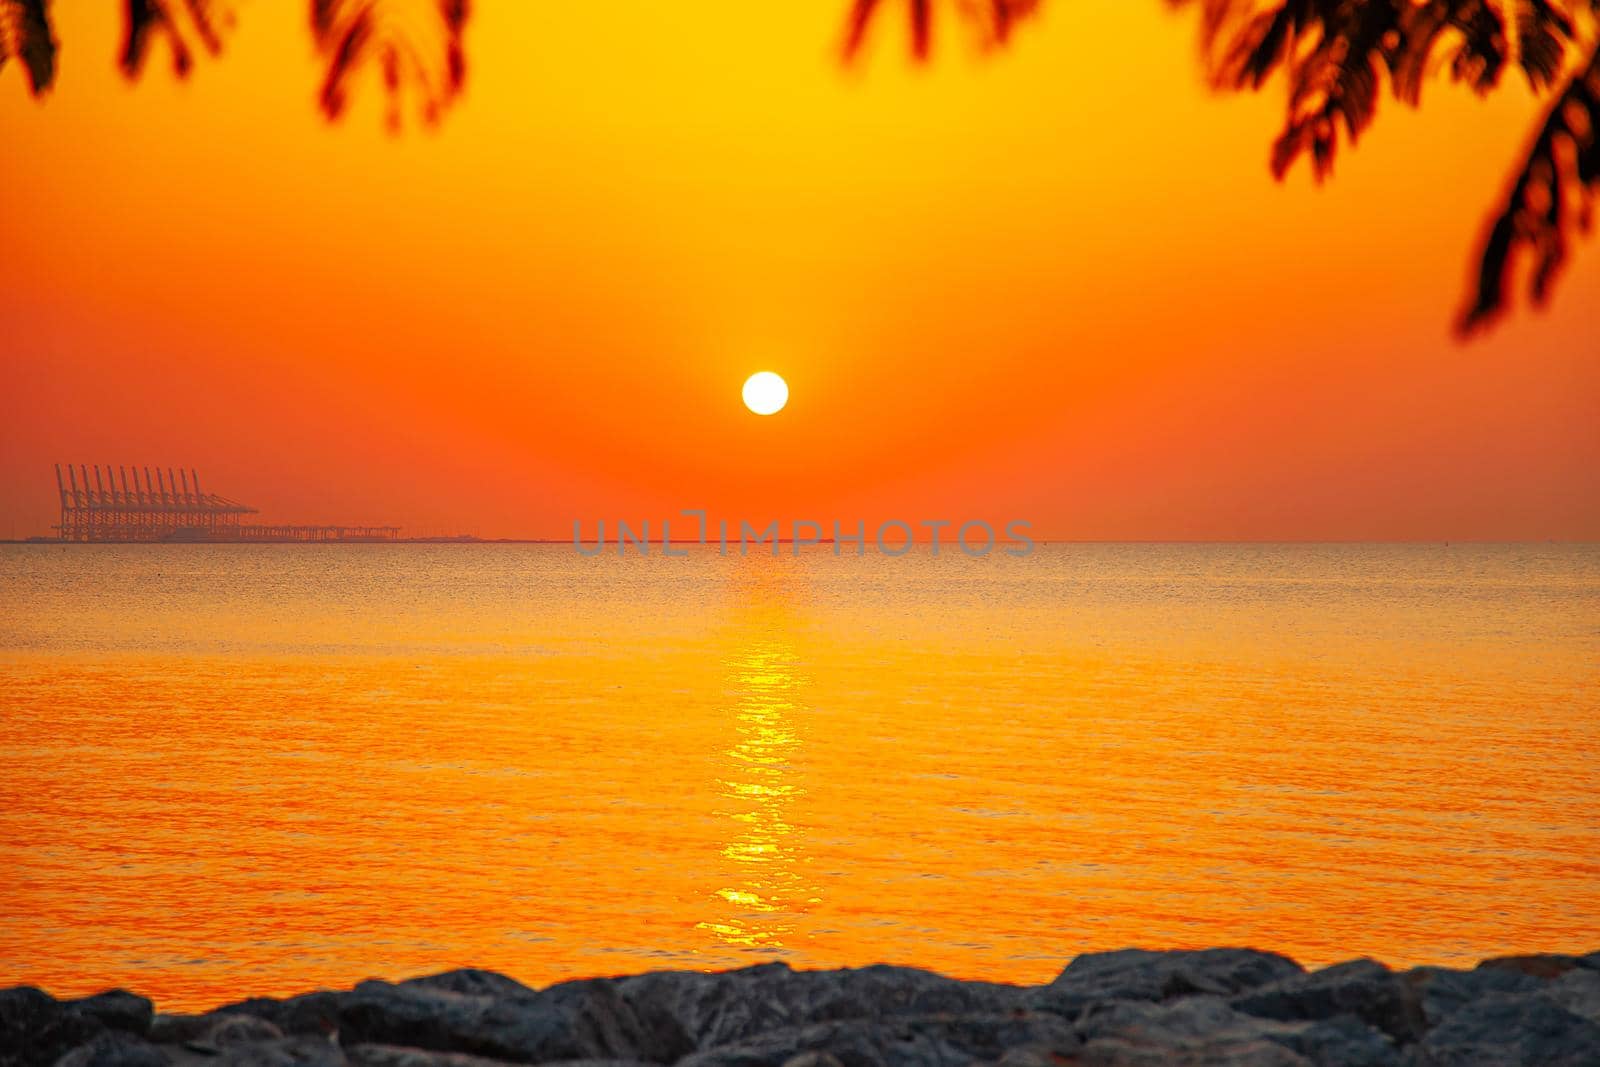 Bright romantic tropical country sea sunset lanscape by kisika